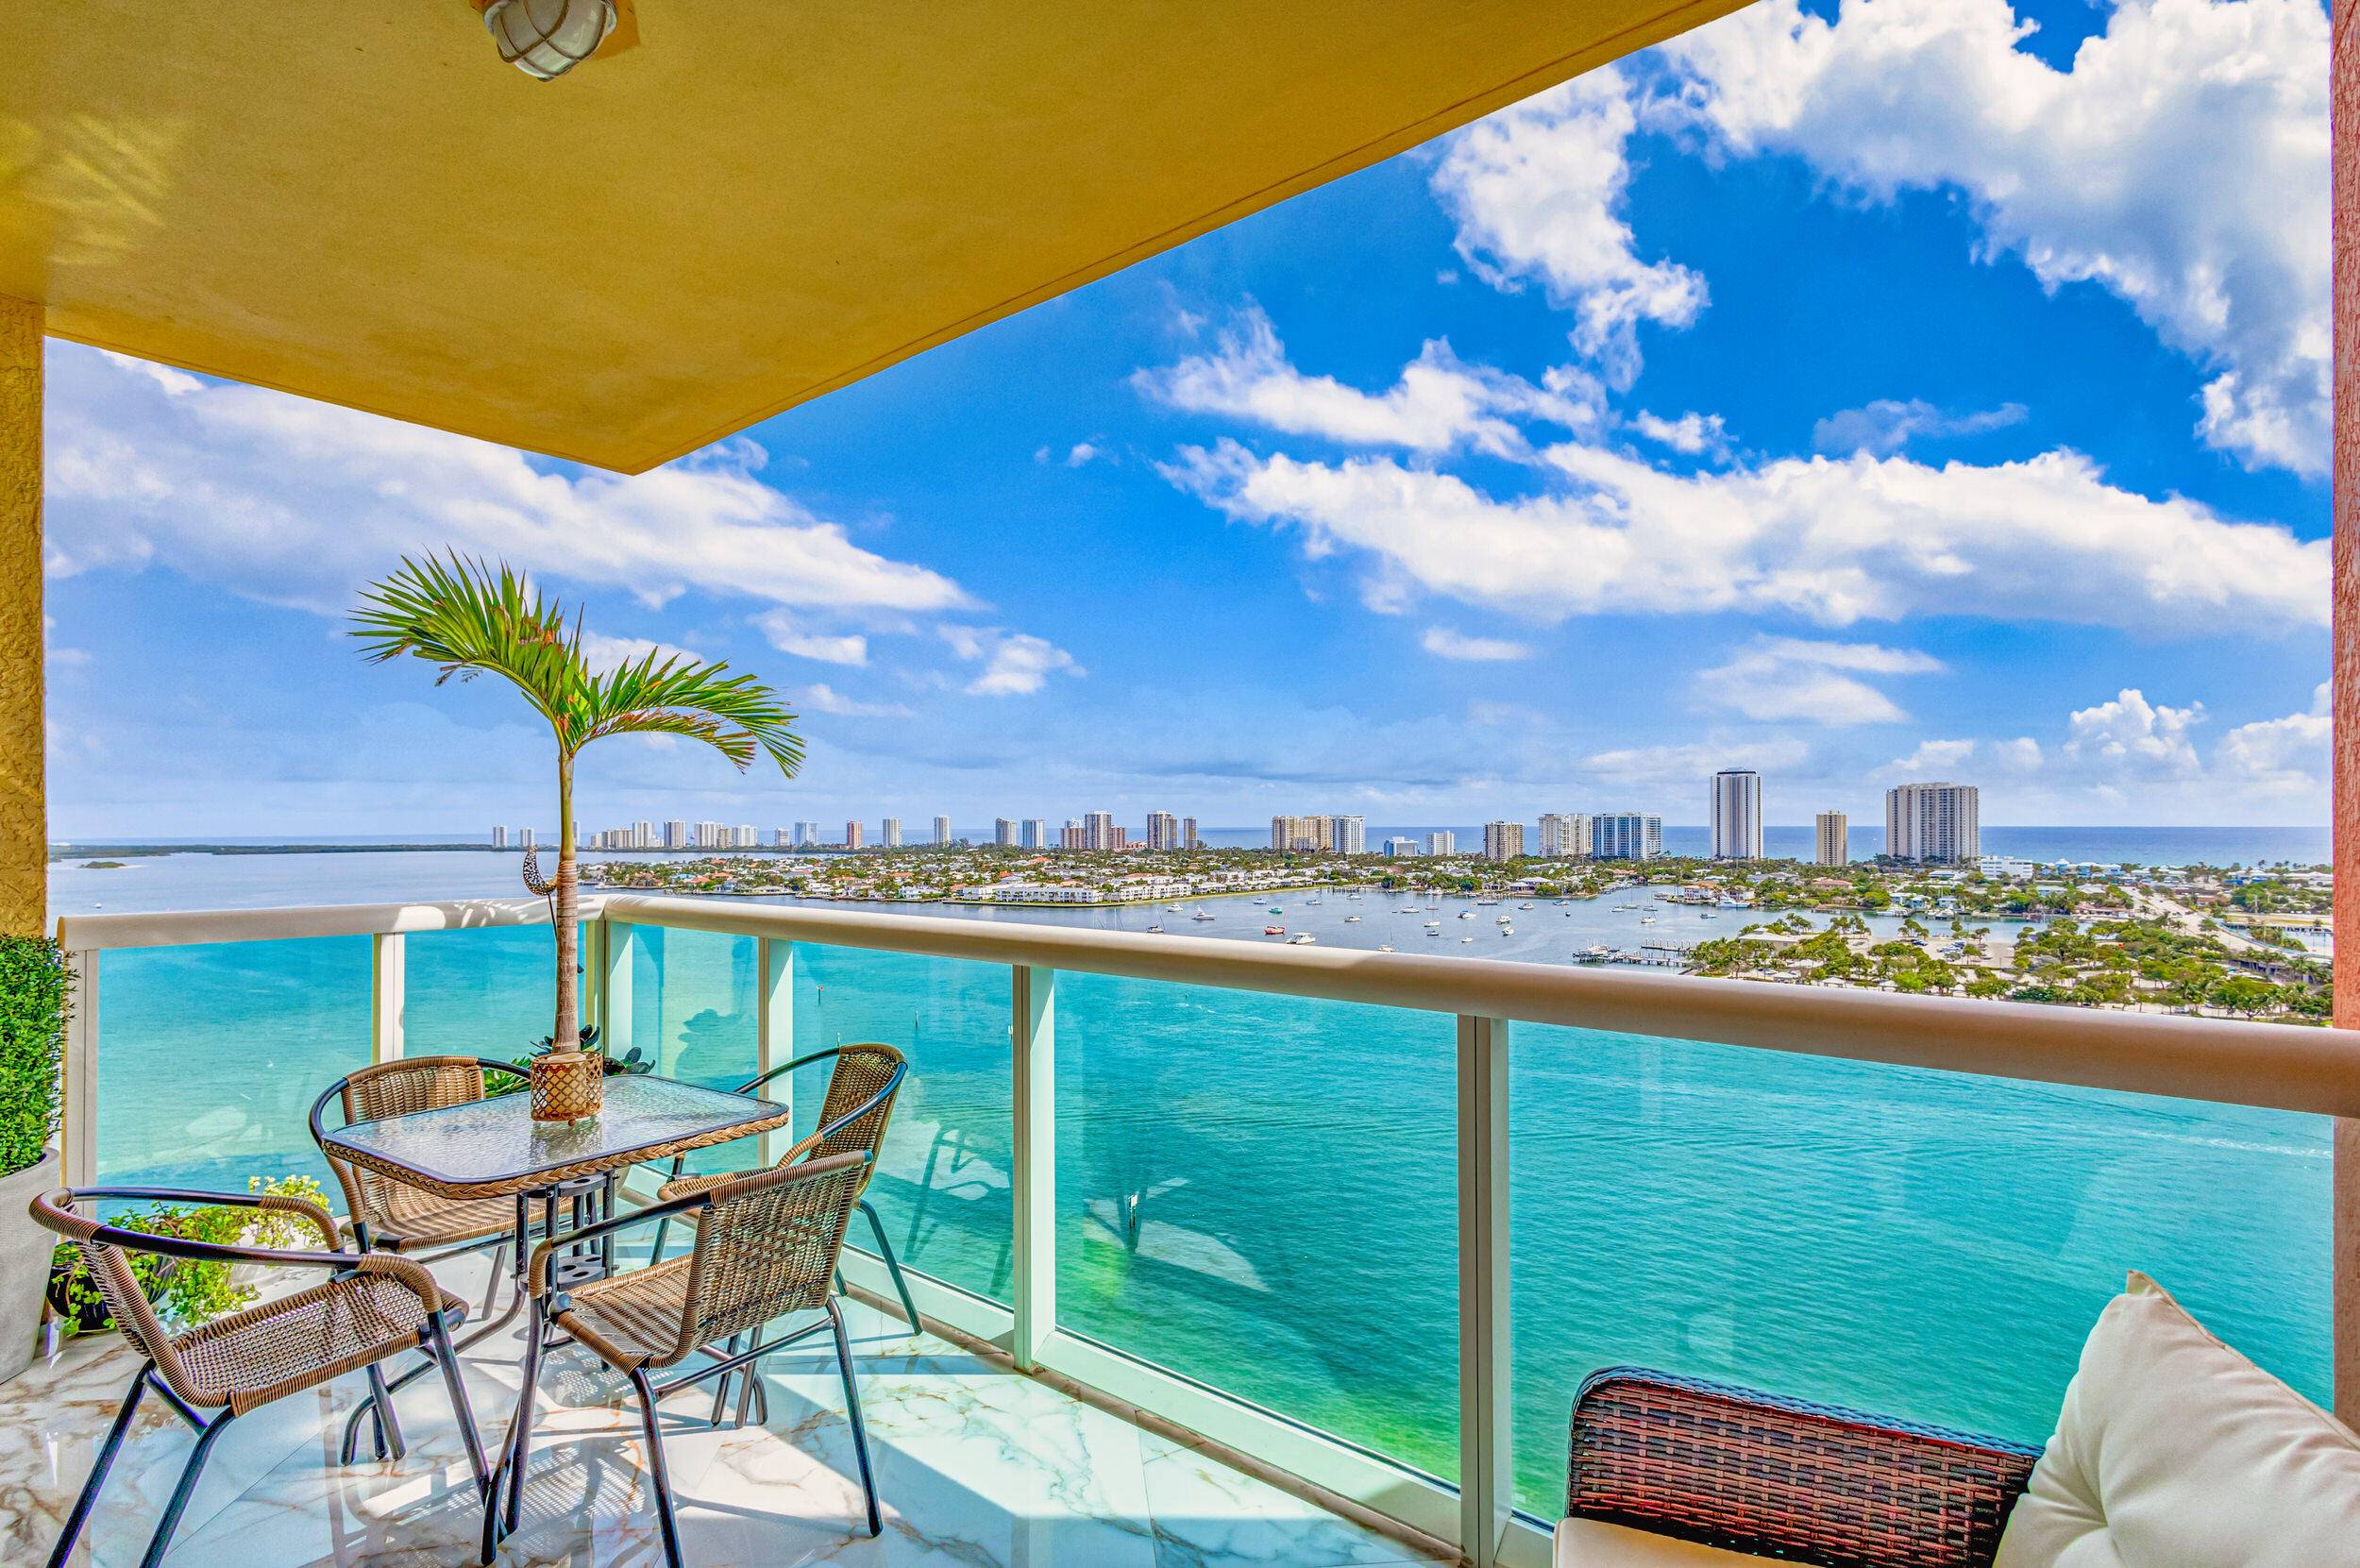 THE MOST SPECTACULAR UNOBSTRUCTED VIEWS OF THE INTERCOSTAL WATERWAYS, VIEWS AS FAR A THE EYE CAN SEE.